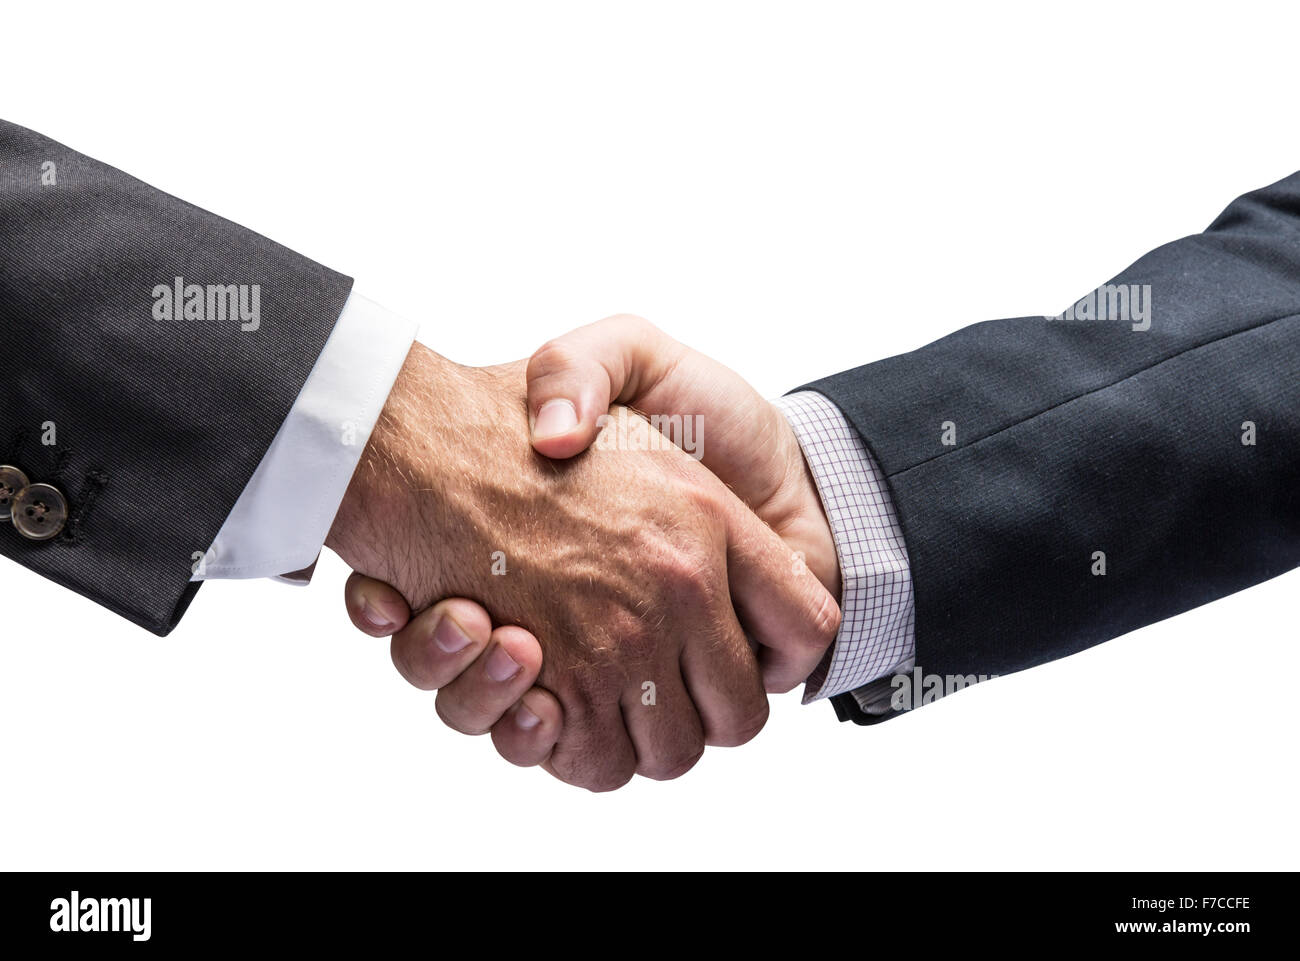 Handshake. Closeup shot of hands. File contains clipping paths. Stock Photo